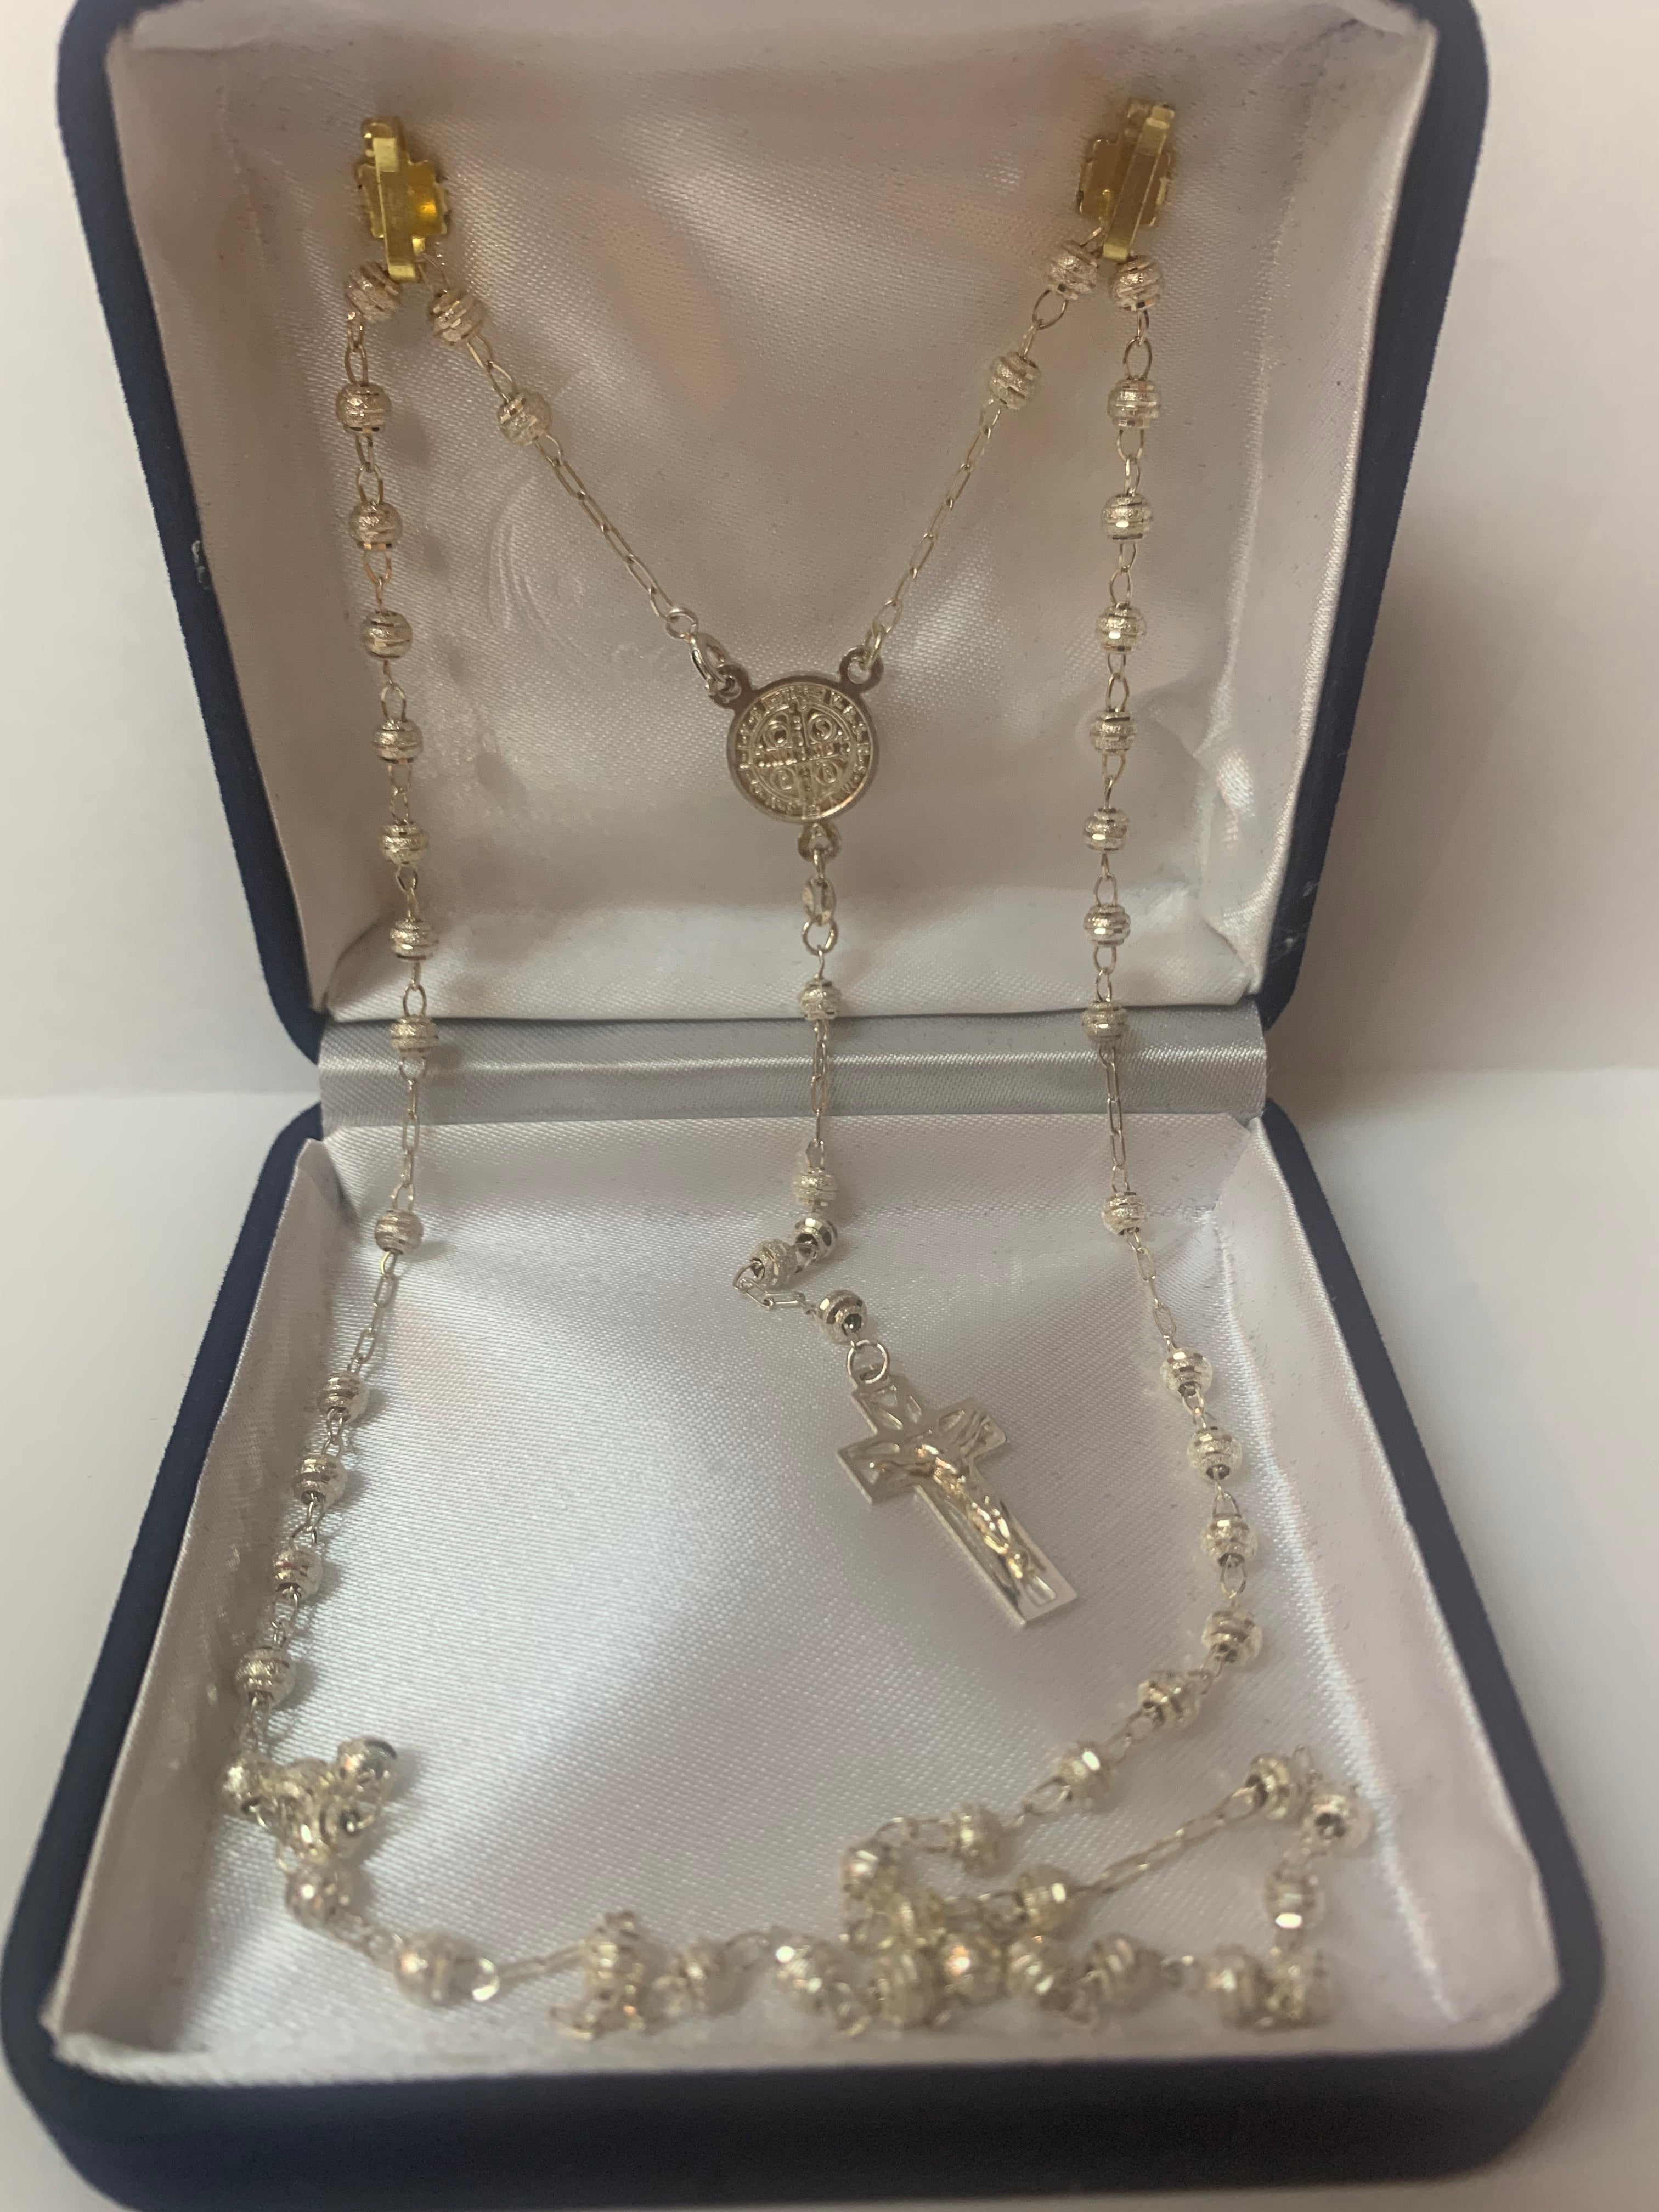 Silver Rosary with Saint Benedict / or Our Lady of Guadalupe medal in the middle